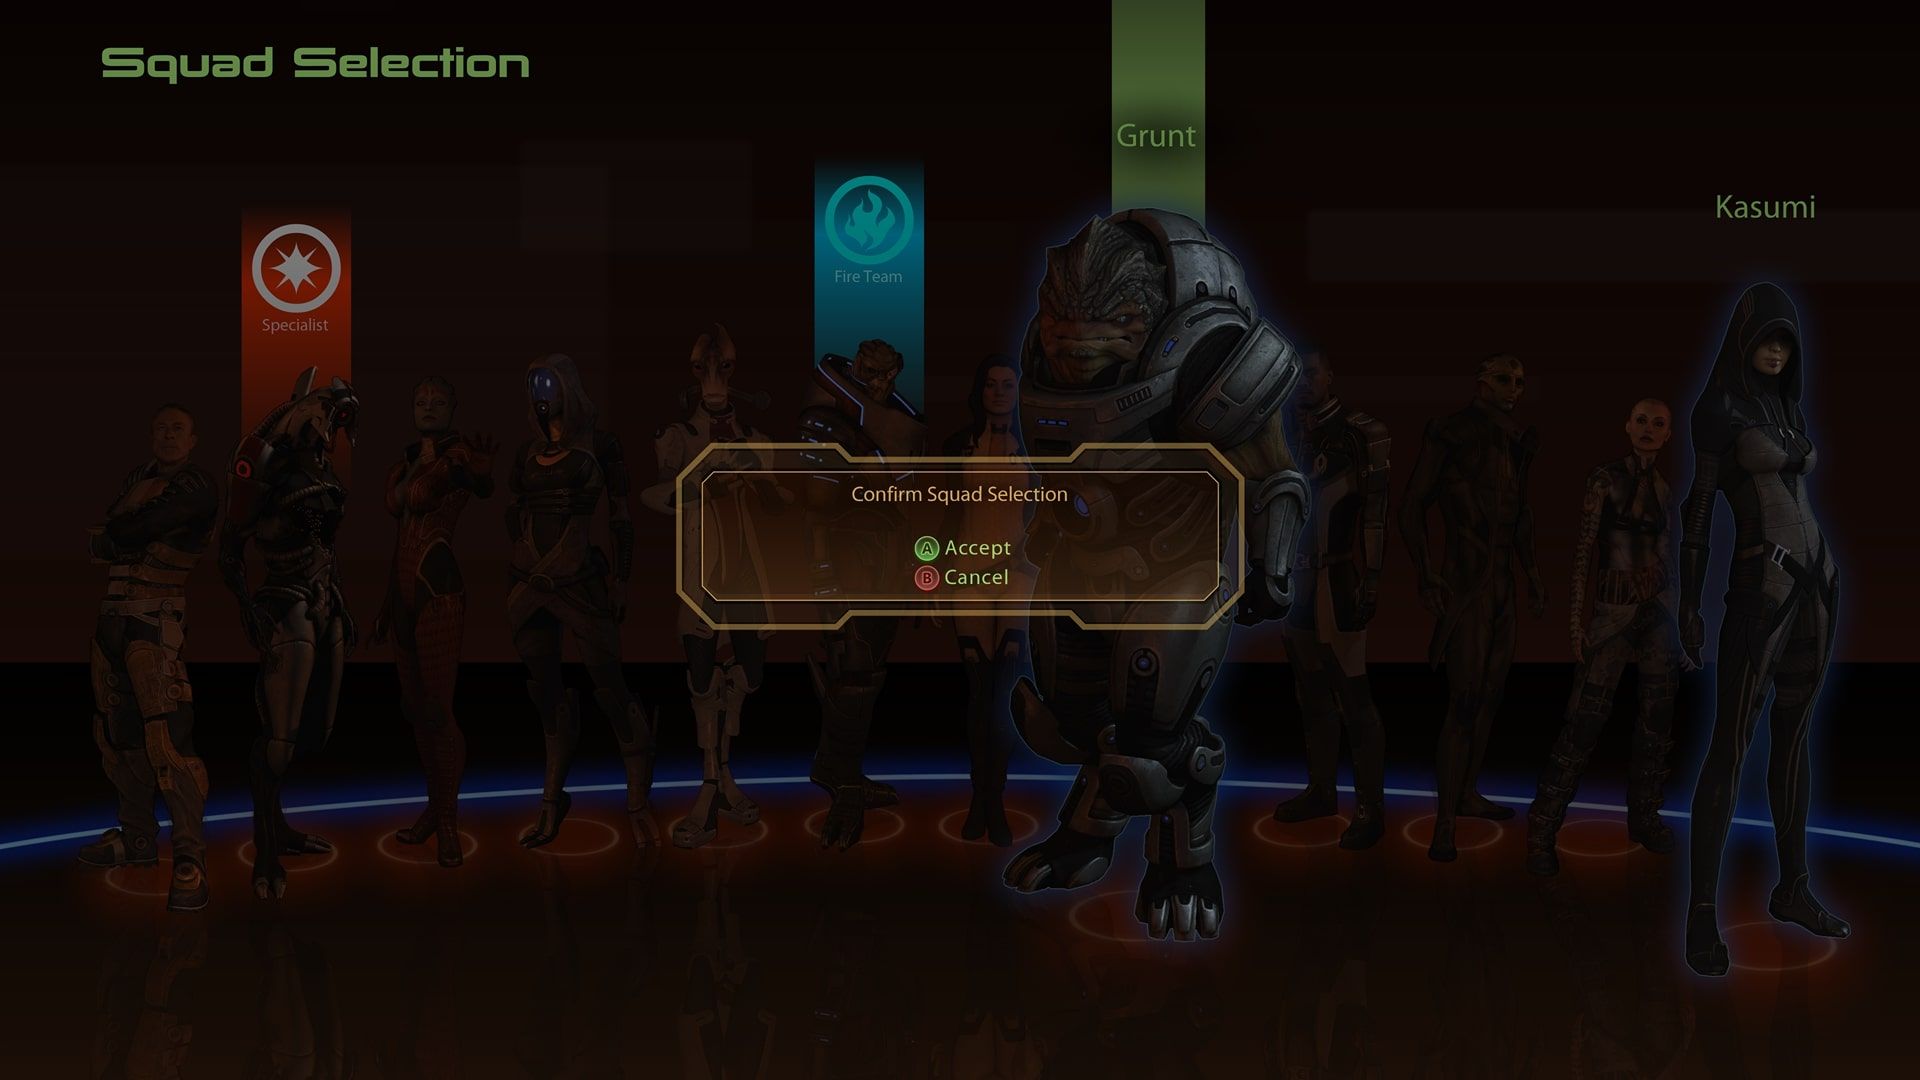 Mass Effect 2 Kasumi and Grunt Squad Selection Screen